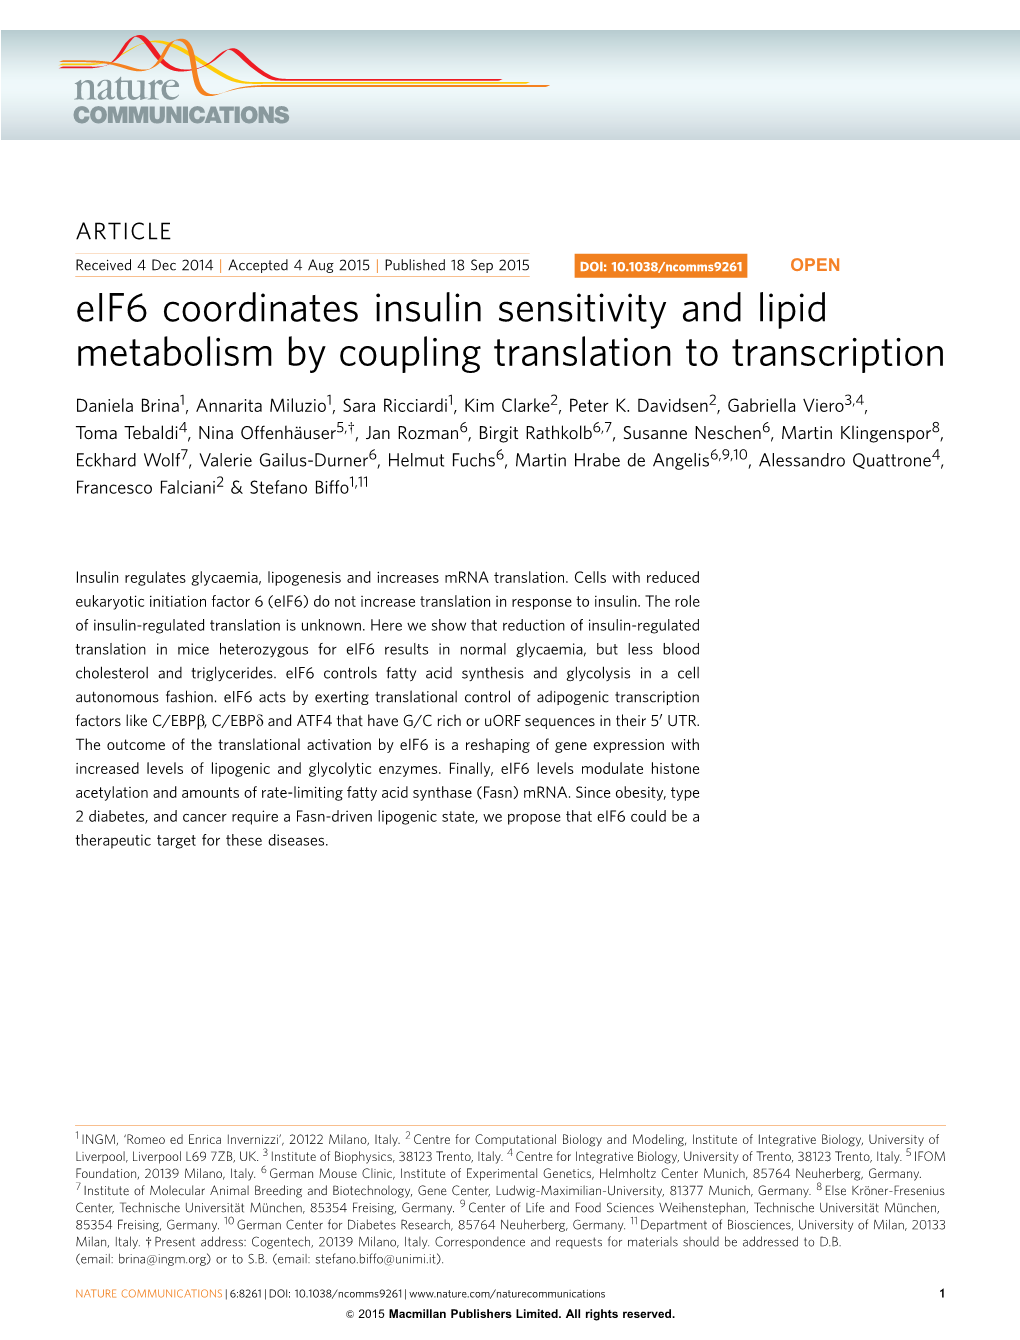 Eif6 Coordinates Insulin Sensitivity and Lipid Metabolism by Coupling Translation to Transcription